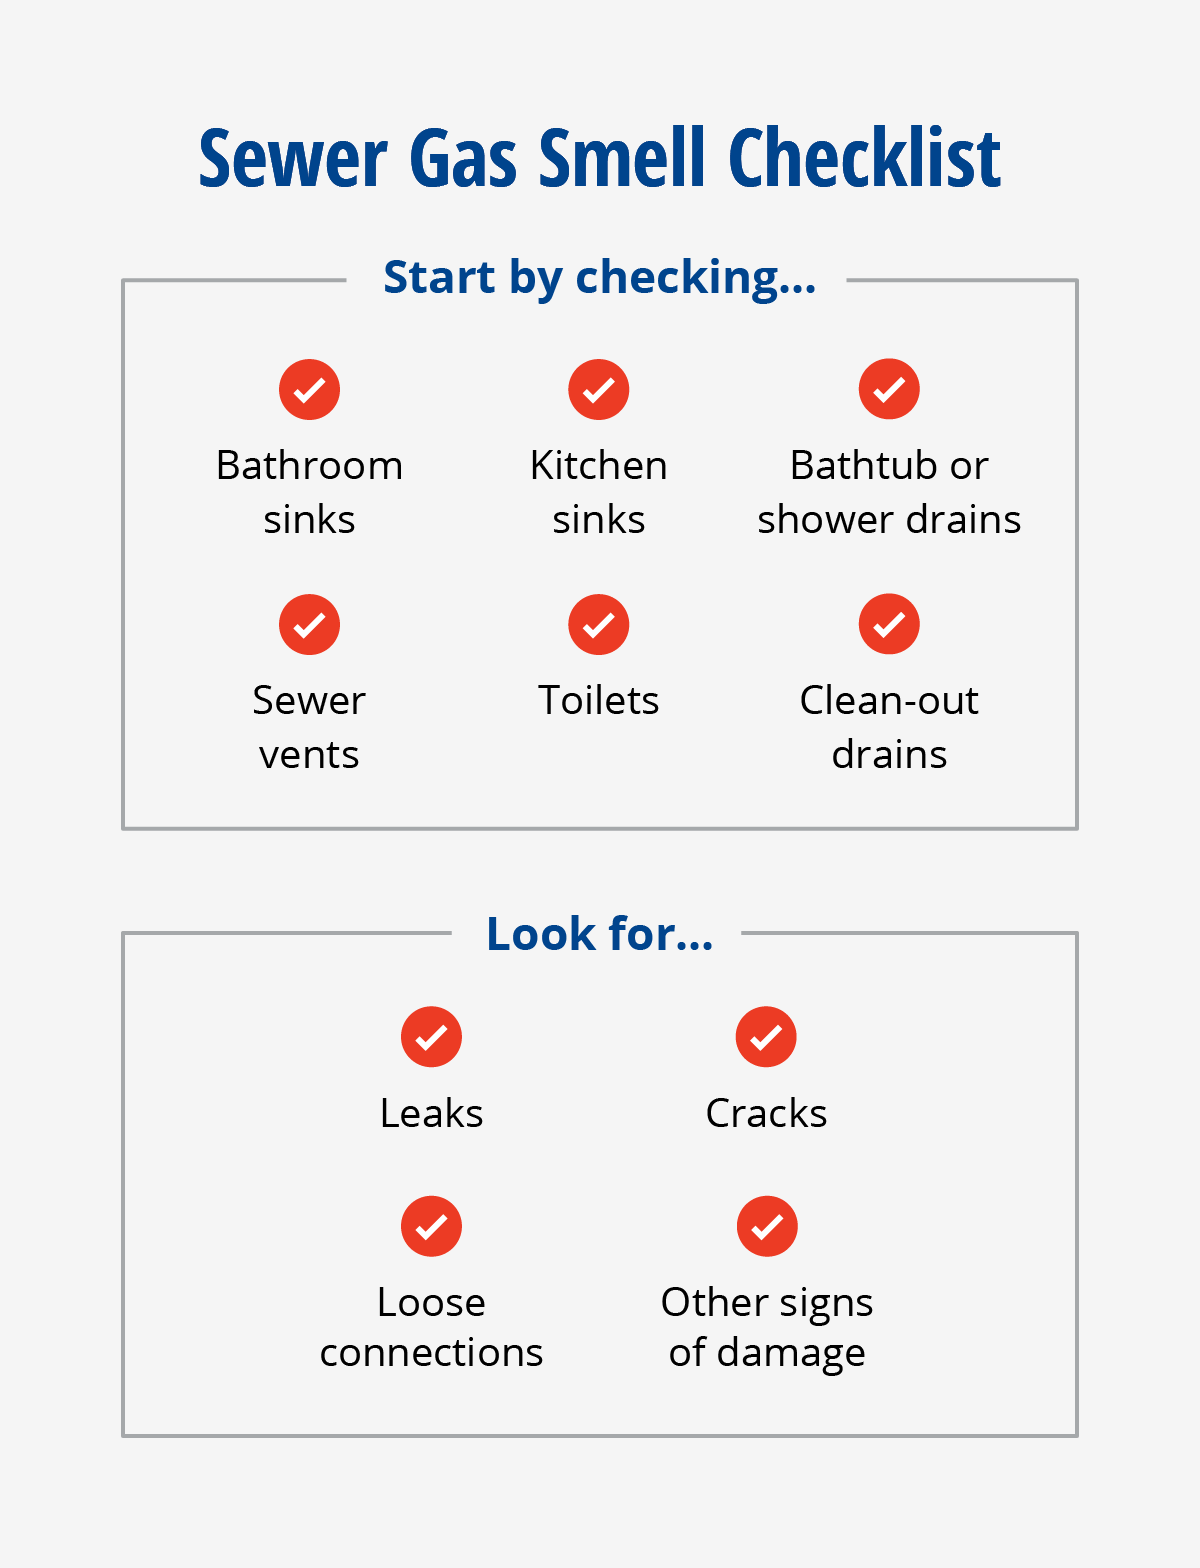 A graphic of a sewer gas smell checklist, explaining the places to check and what to look for.